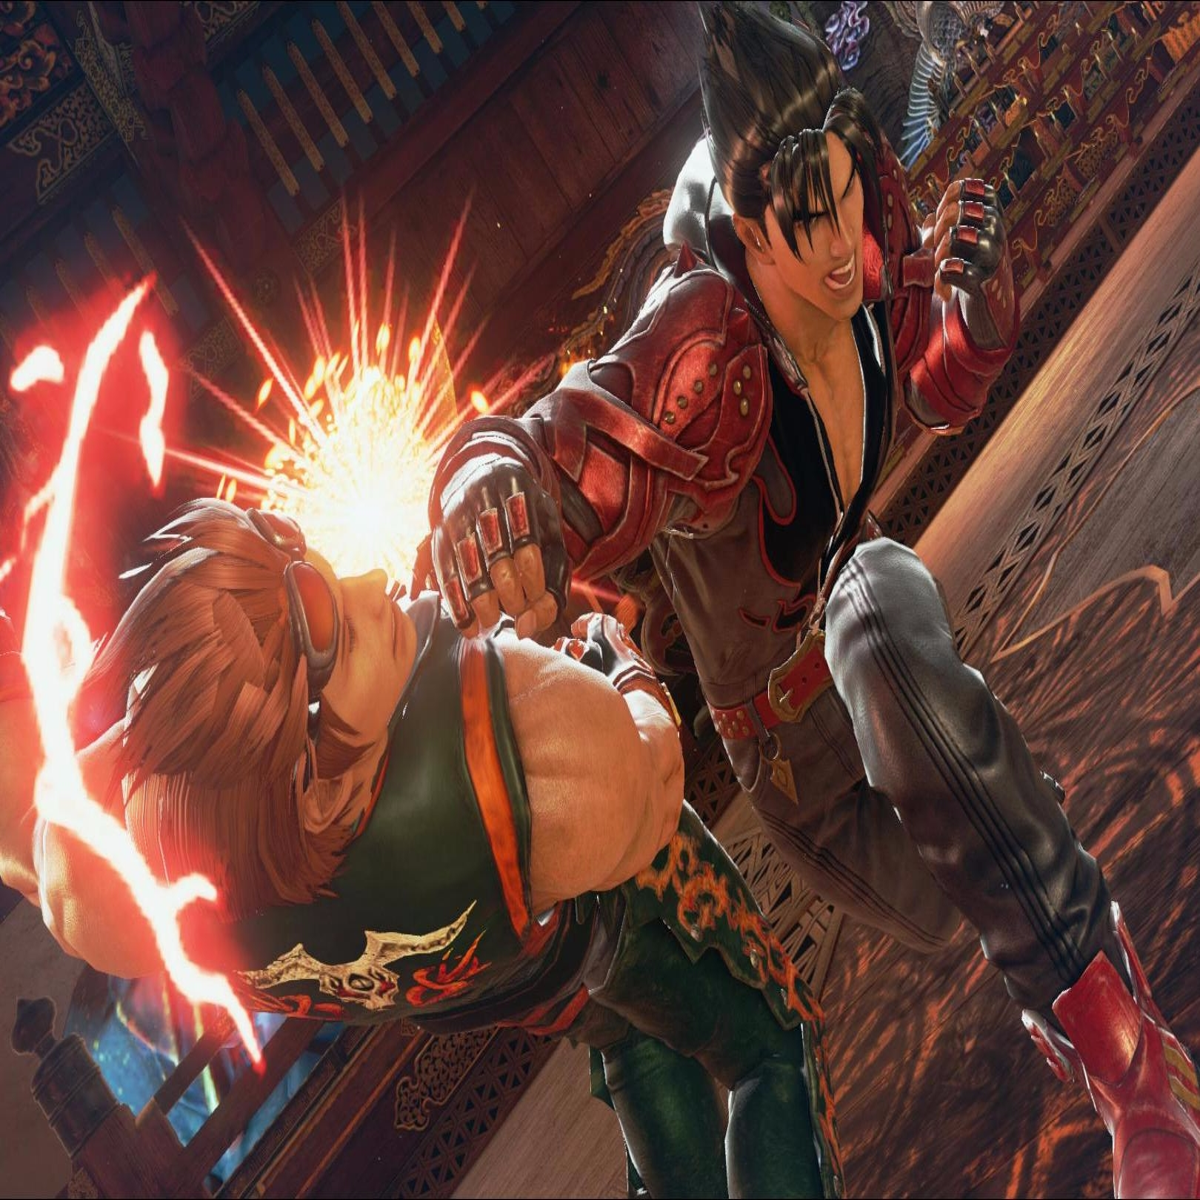 Why Tekken 8 skipping old-gen consoles is the best decision Bandai Namco  could have made for their upcoming title